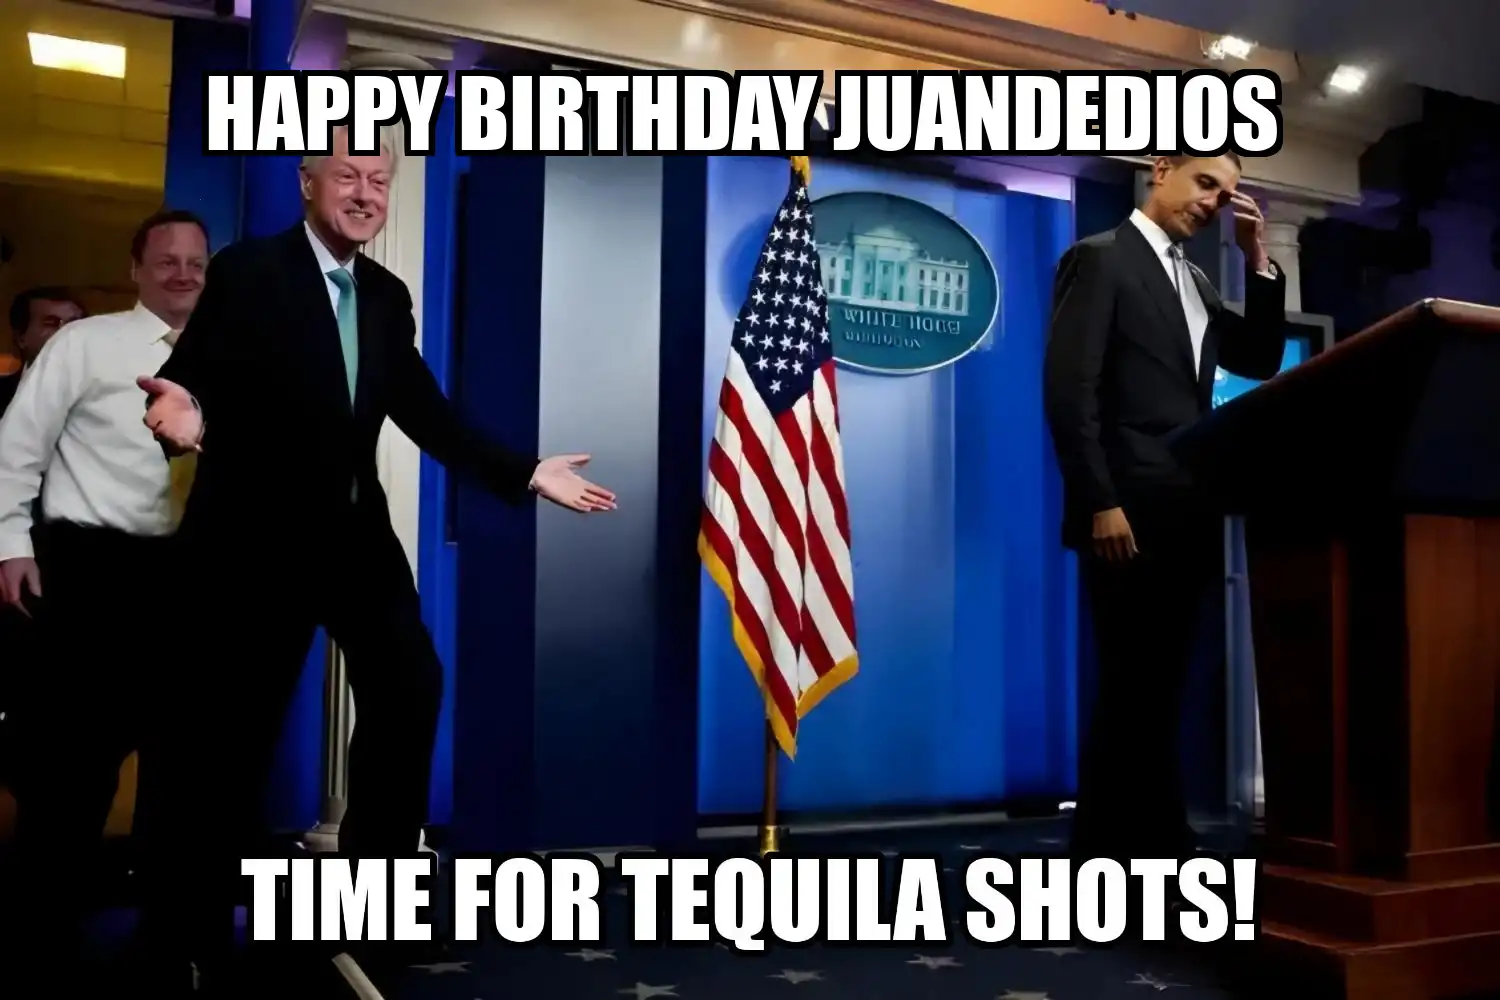 Happy Birthday Juandedios Time For Tequila Shots Memes